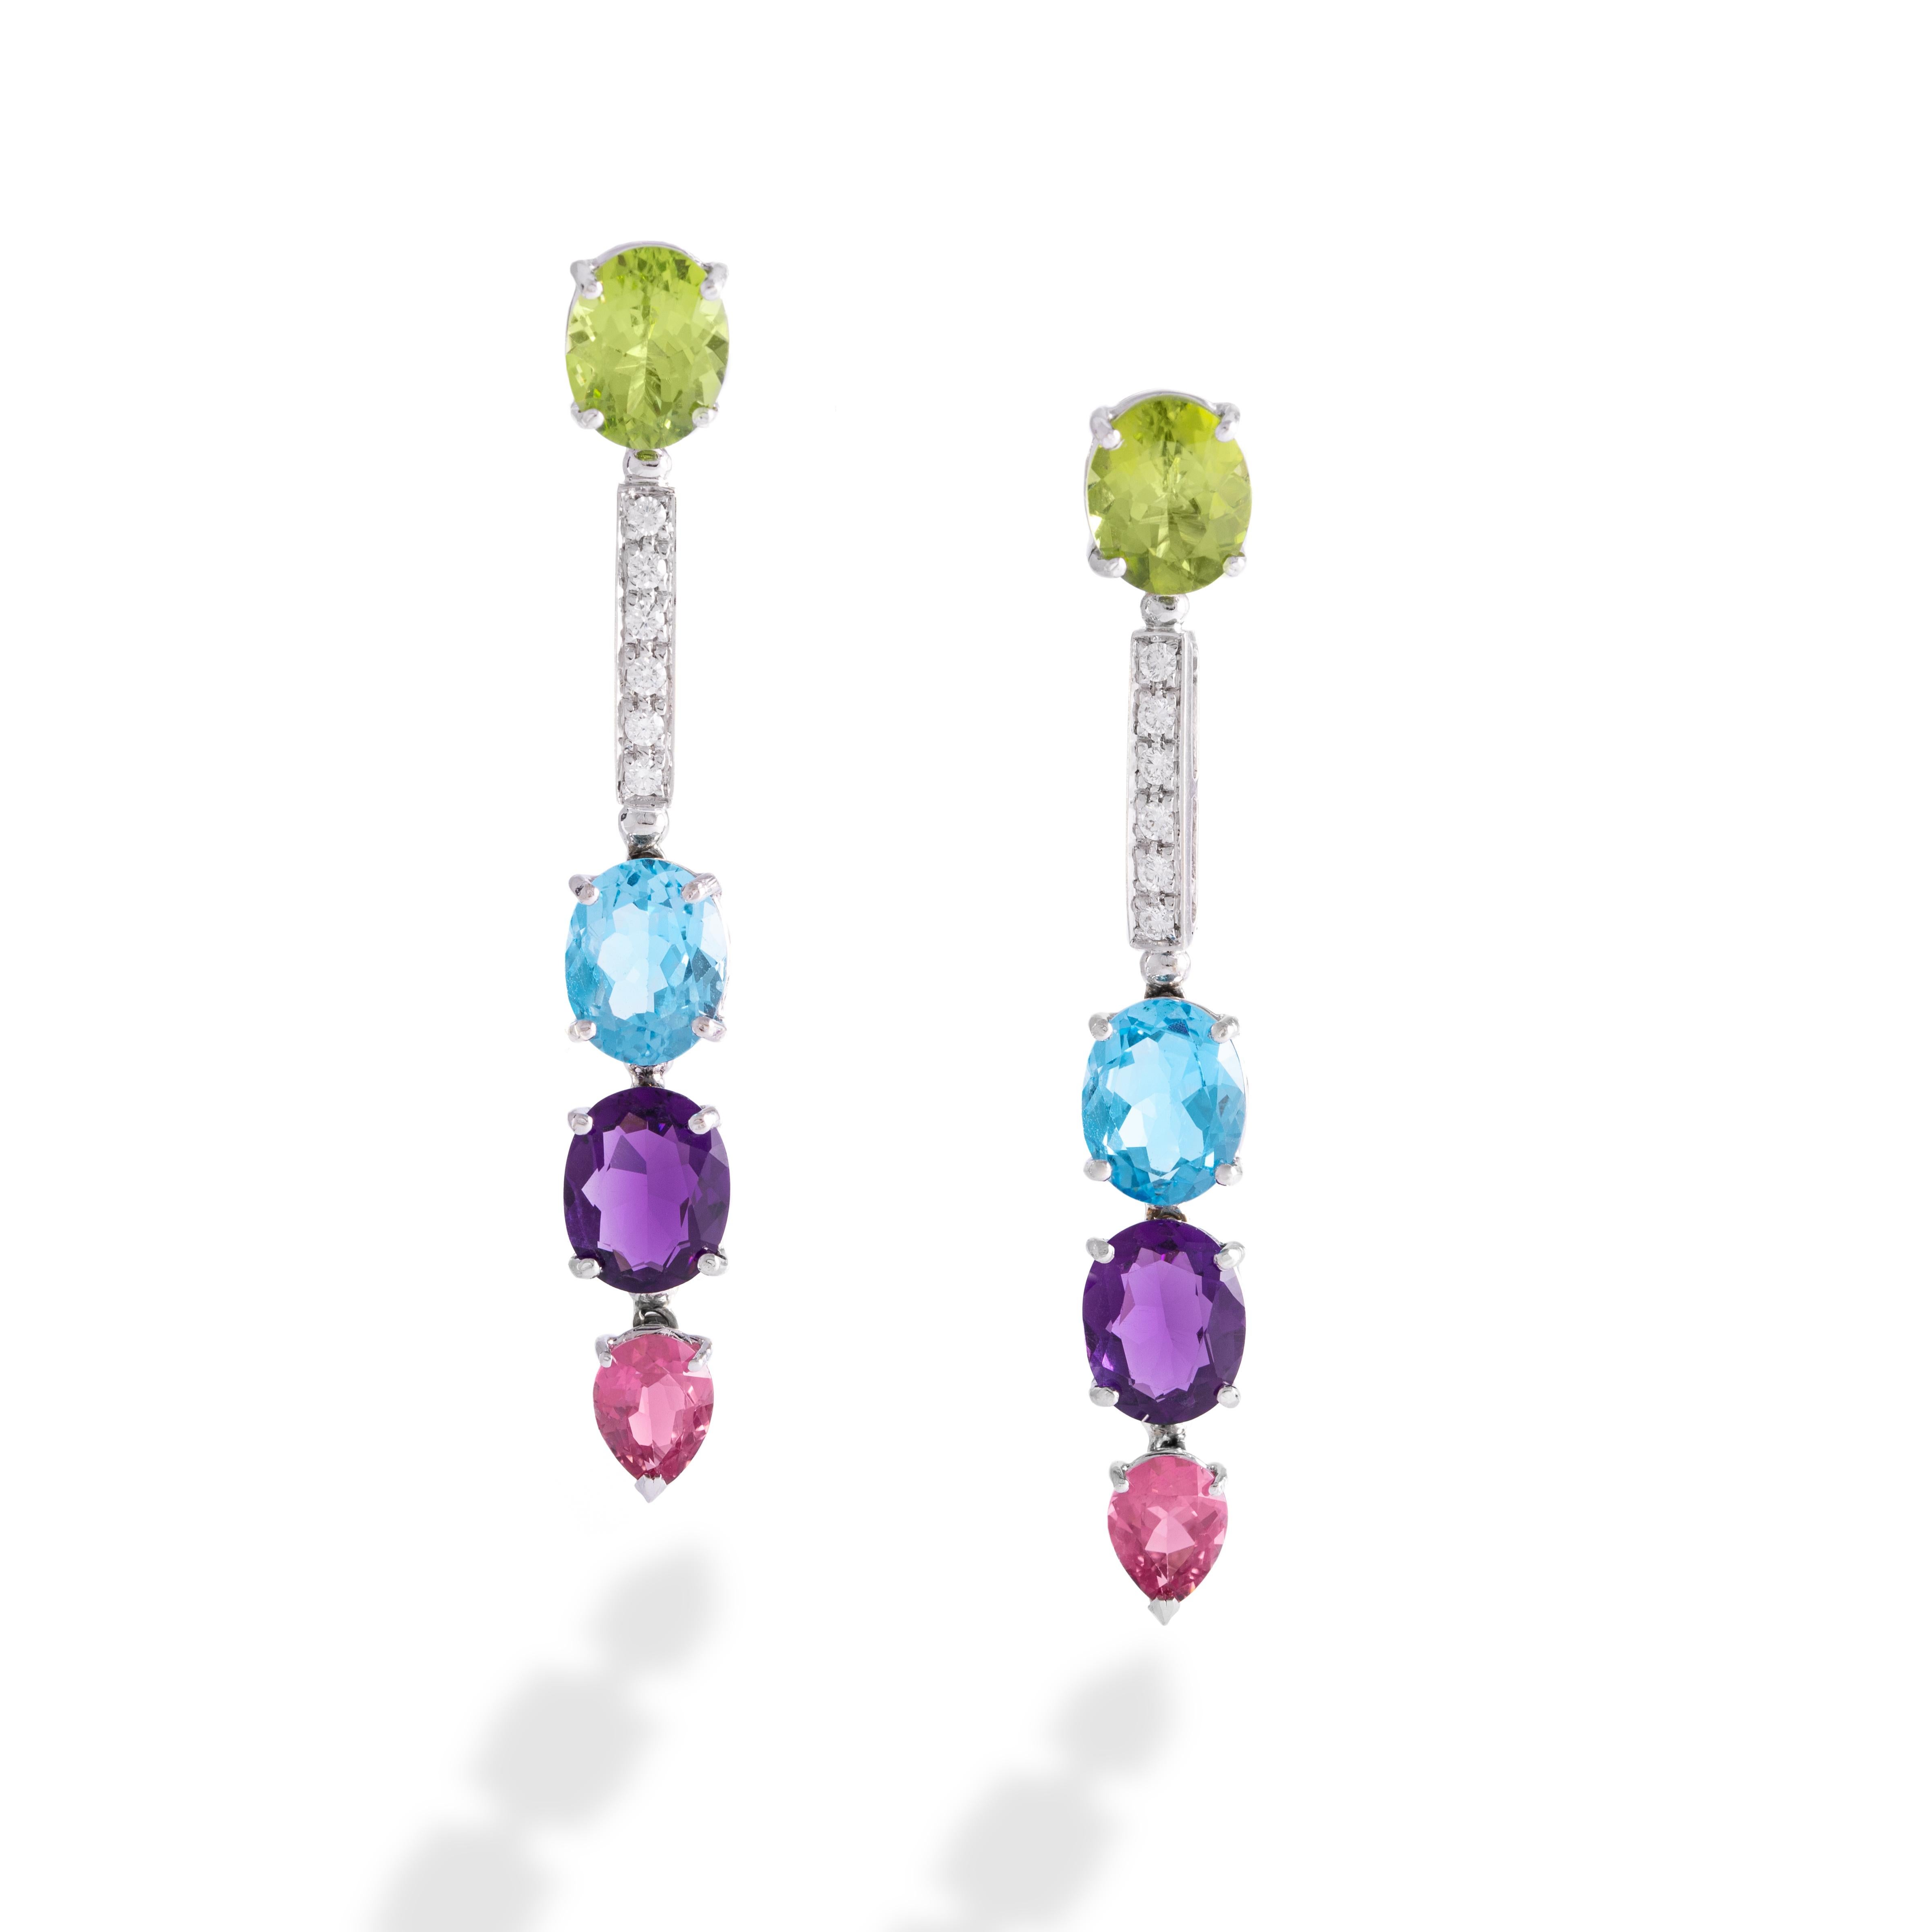 Peridot, Aquamarine, Amethyst and Diamond on white gold 18K Earrings.

Length: 6.10 centimeters.
Width: 0.30 centimeters up to 0.80 centimeters.
Total weight: 13.64 grams.

